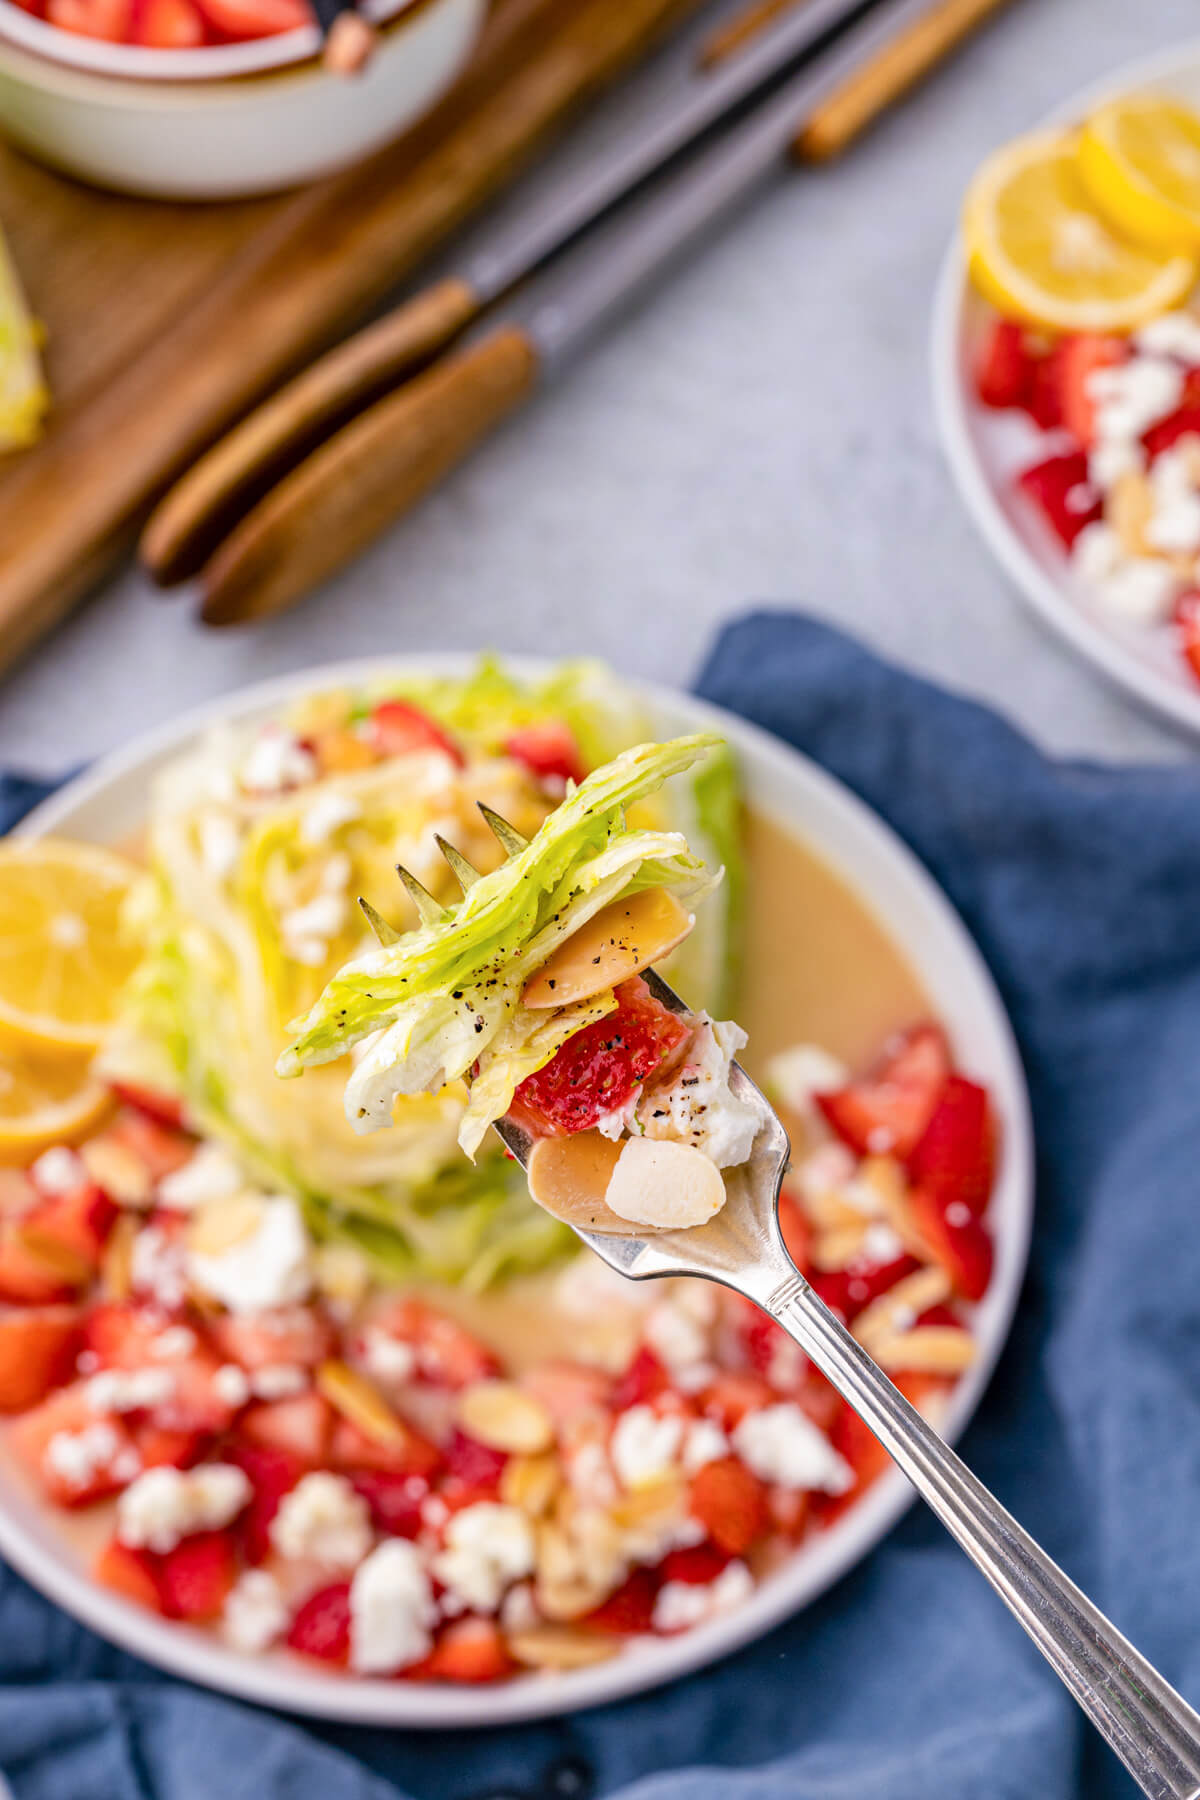 A fork holds a bite of strawberry feta wedge salad.